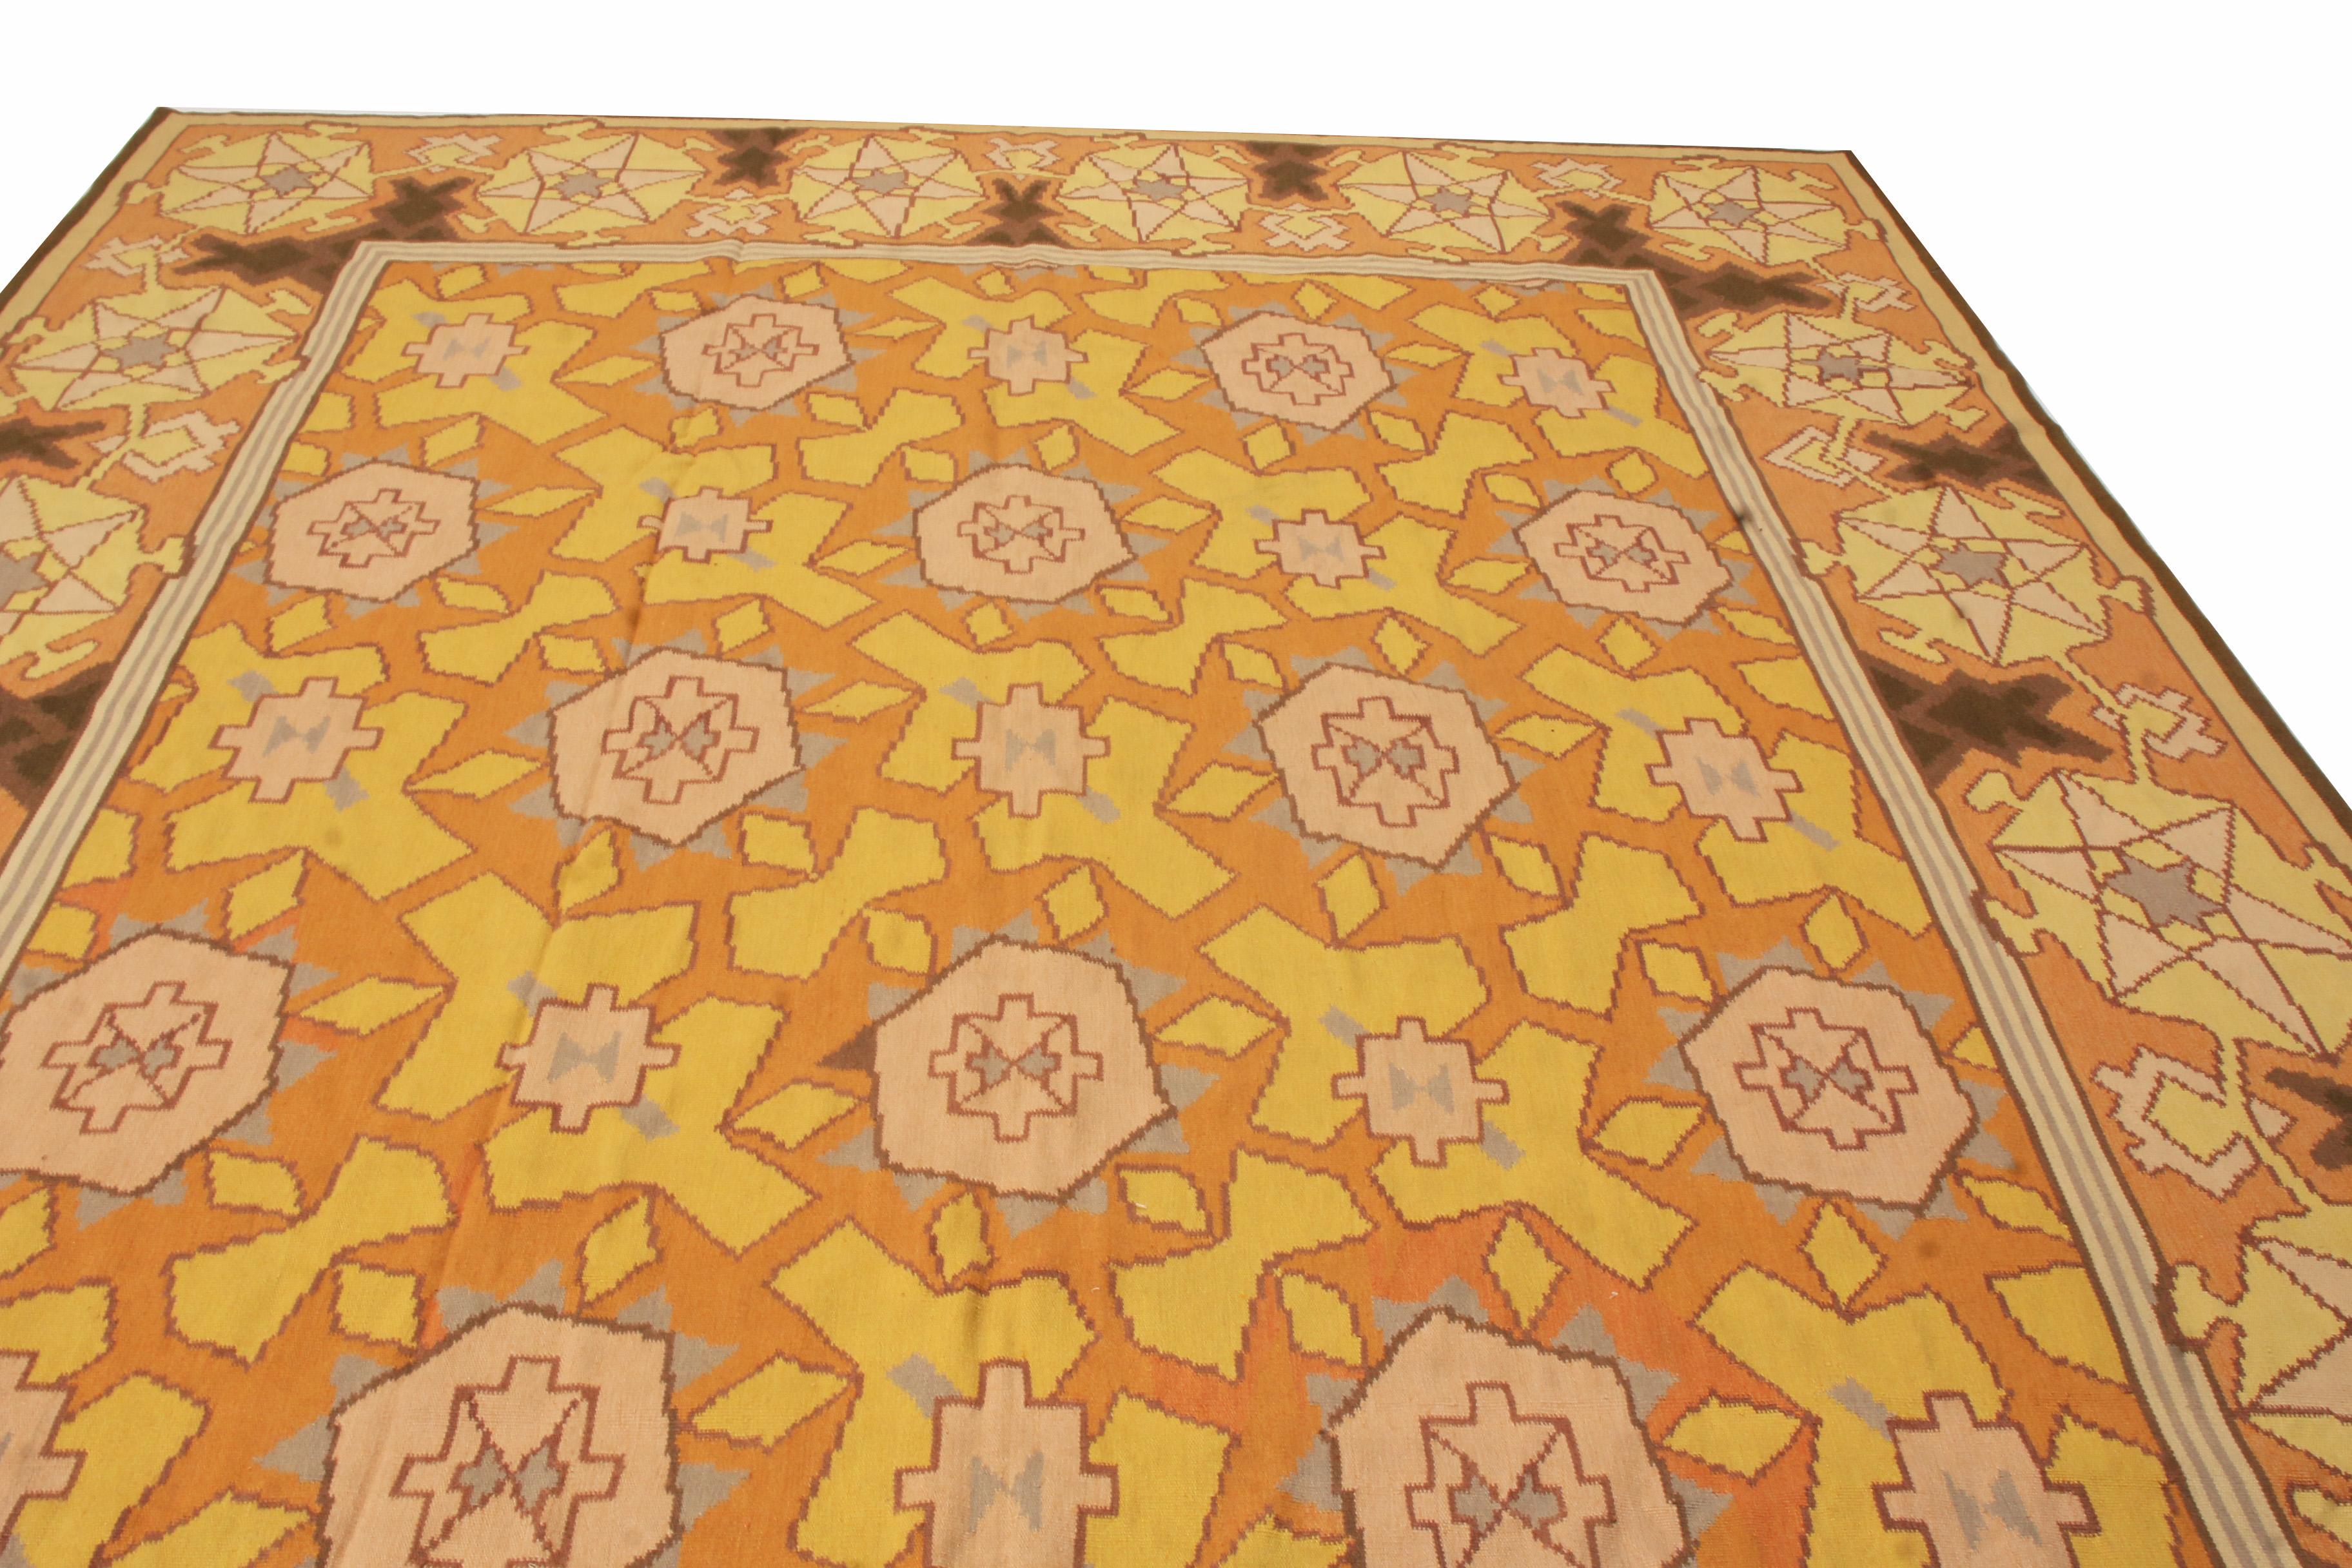 Originating from Romania, this contemporary rug is hand knotted in fine, high quality wool with highly stylized geometric imagery. The field design, set against a rustic sunset orange background, depicts a series of pink and yellow geometric symbols